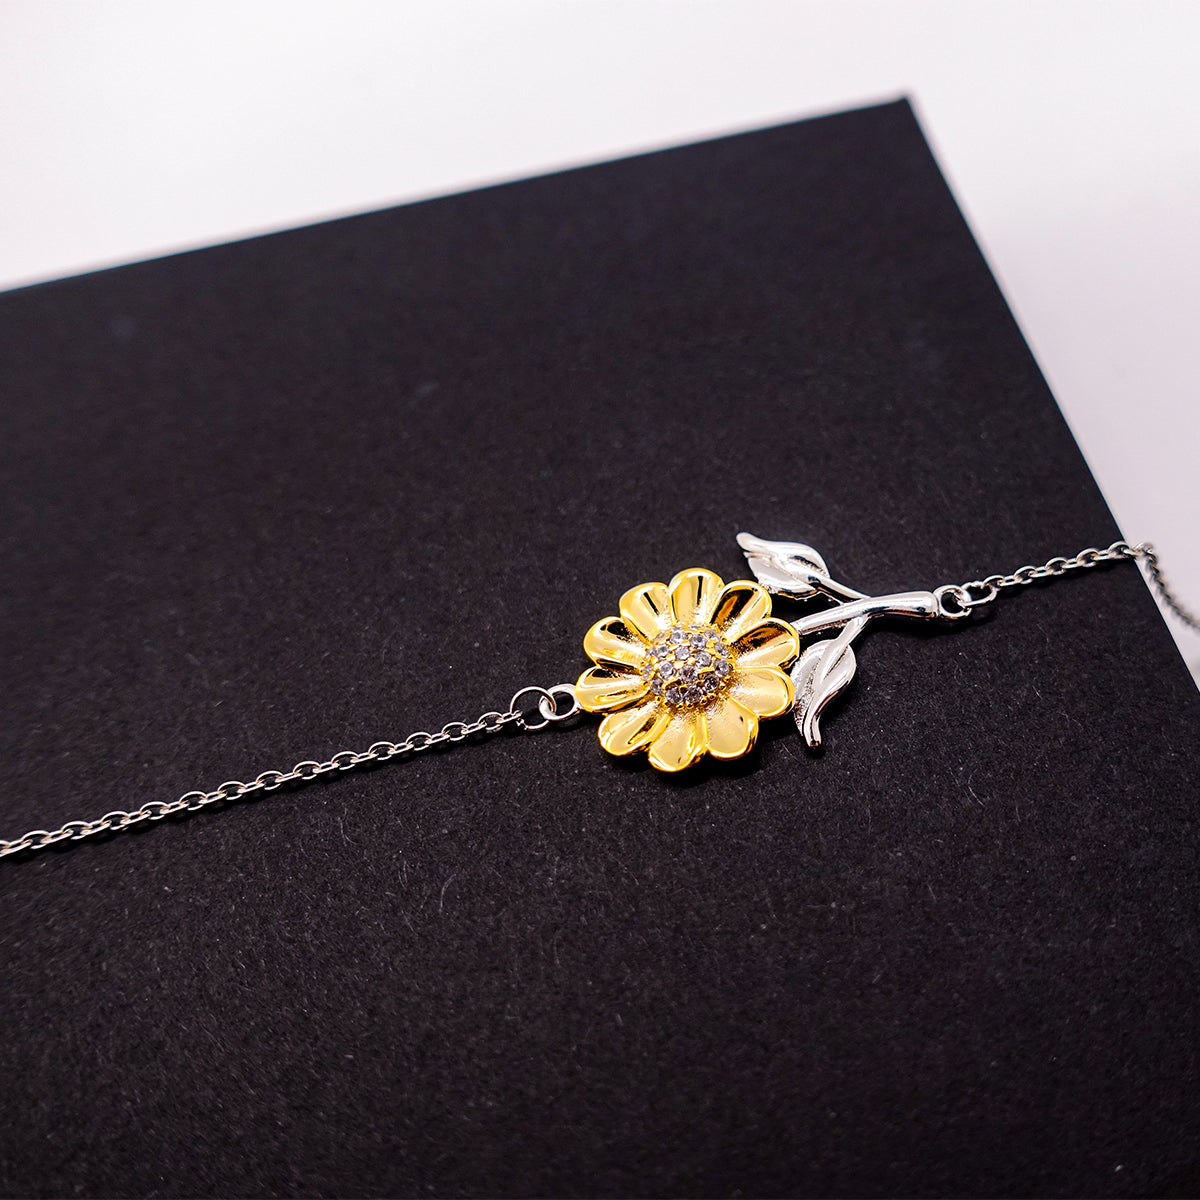 Godmother Sunflower Bracelet - You will always have a special place in my heart. Engraved inspirational gift for Birthday, Holidays, Christmas, Graduation, Veterans Day, Easter - perfect for your loved one